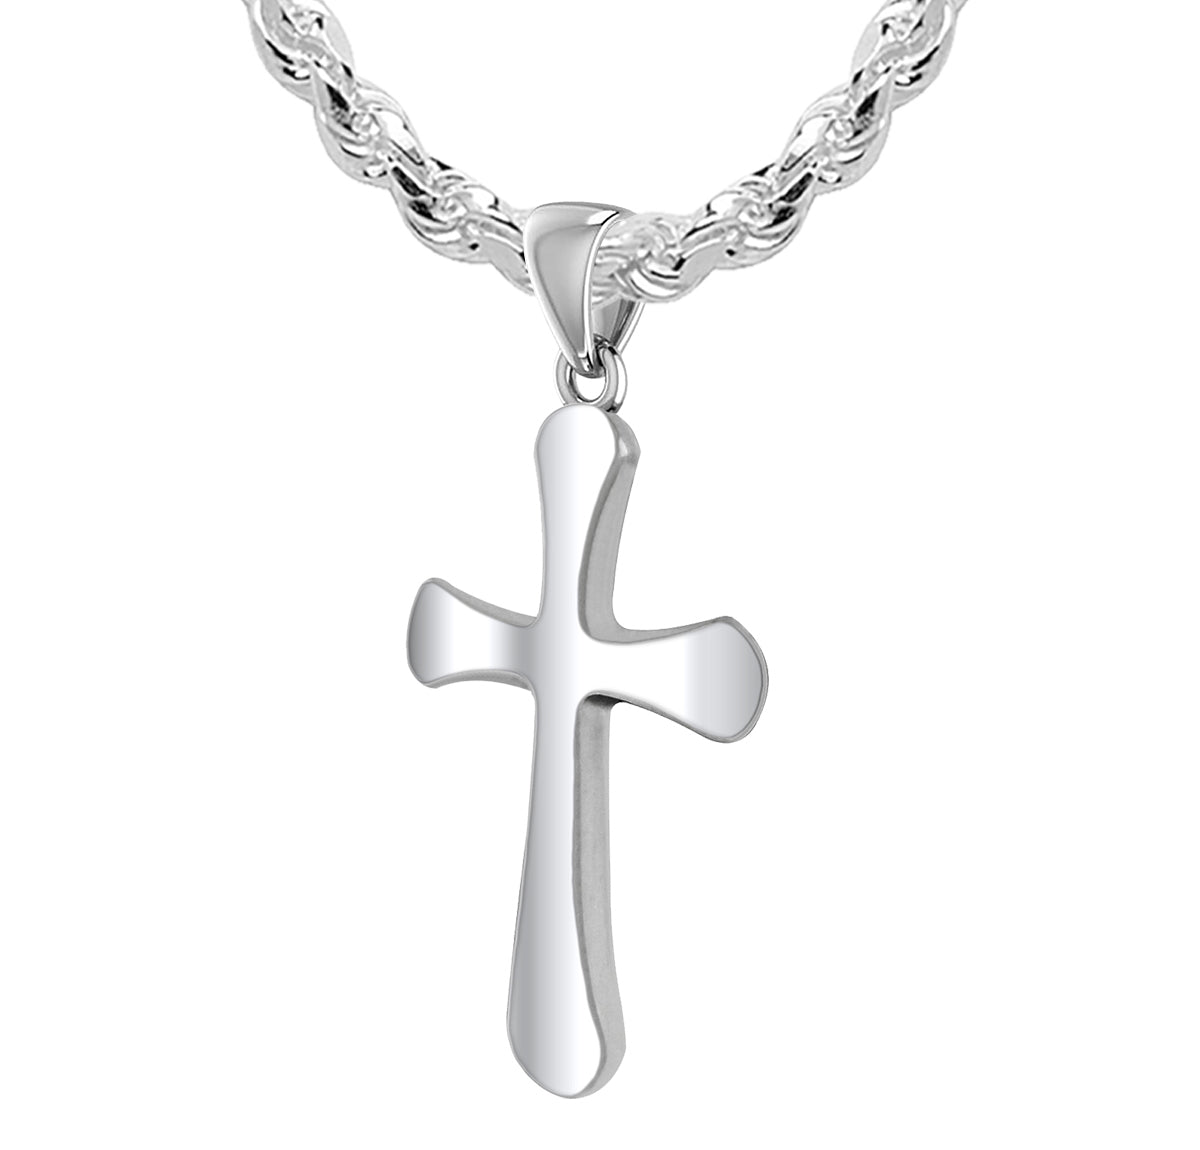 1 1/16in Solid 925 Sterling Silver High Polished Cross Pendant Necklace - US Jewels